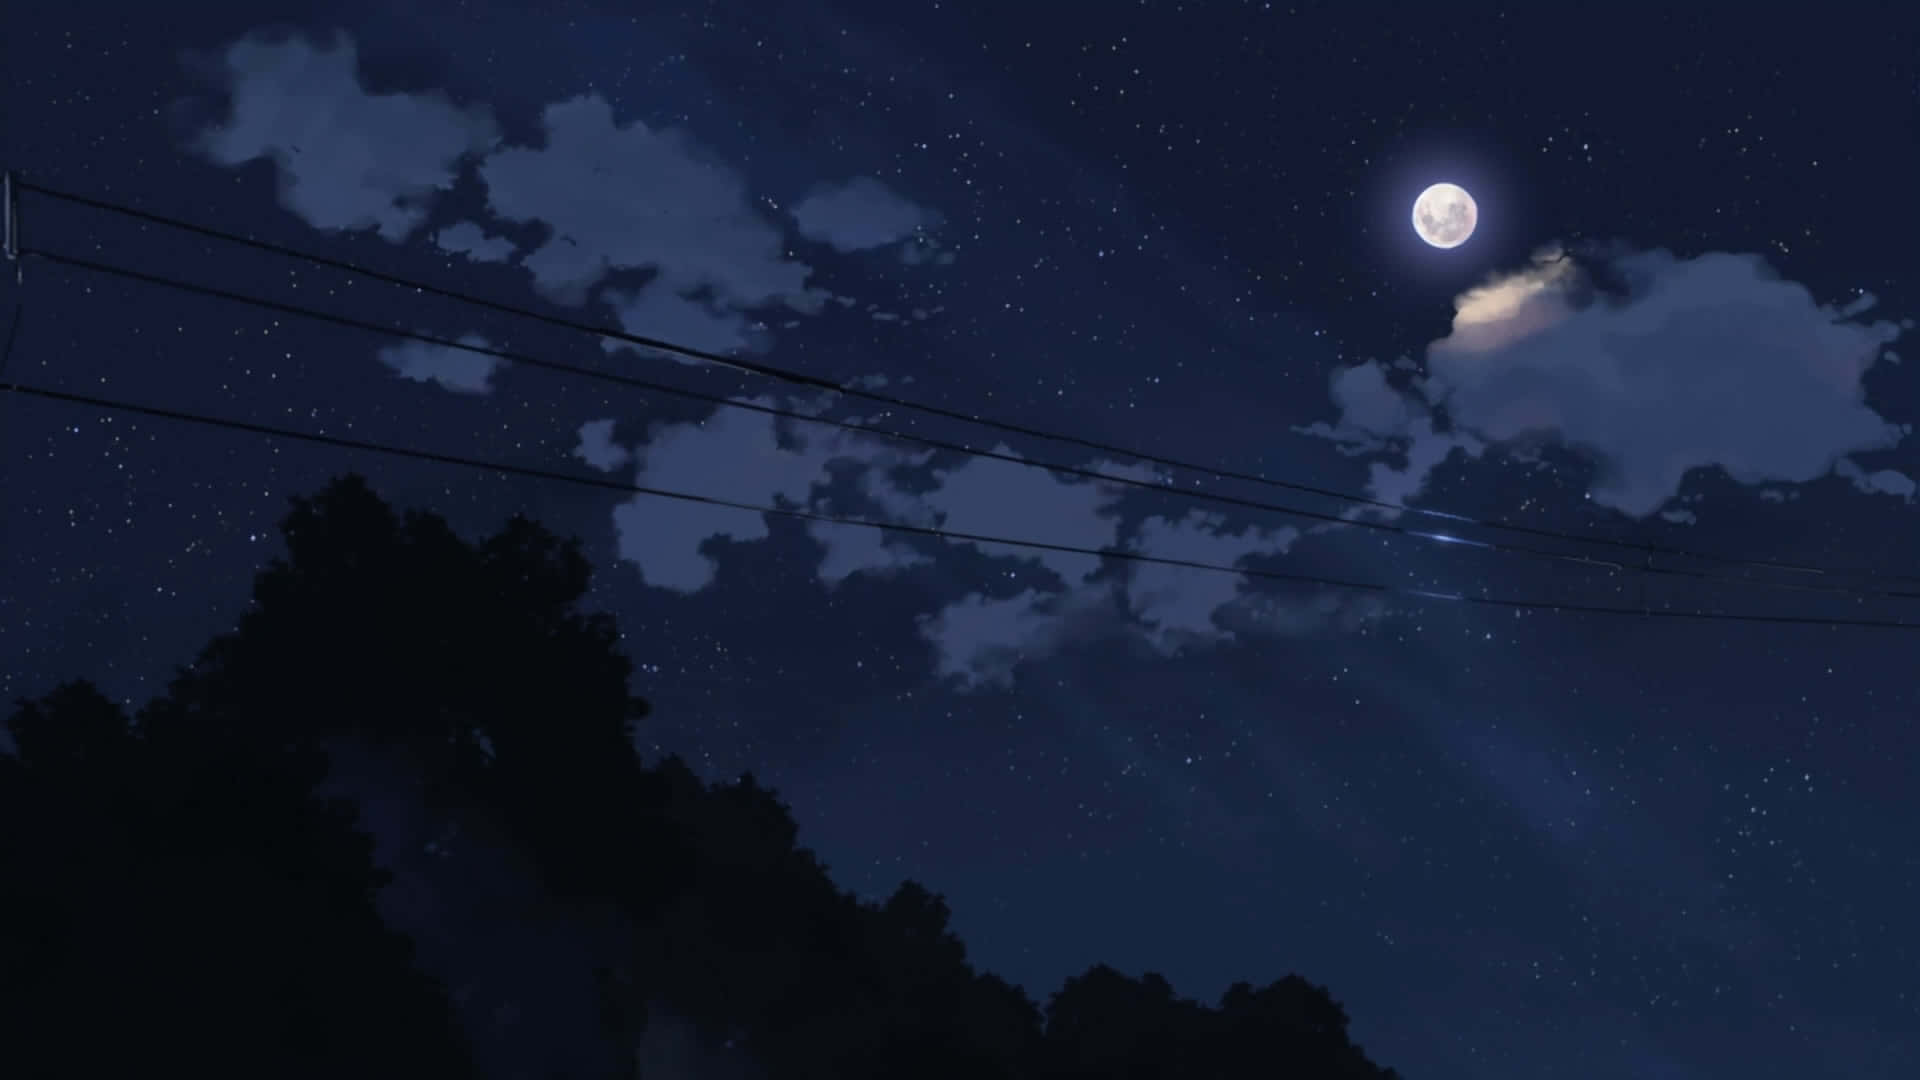 Night Anime Sky Features Electrical Cables And Trees Picture